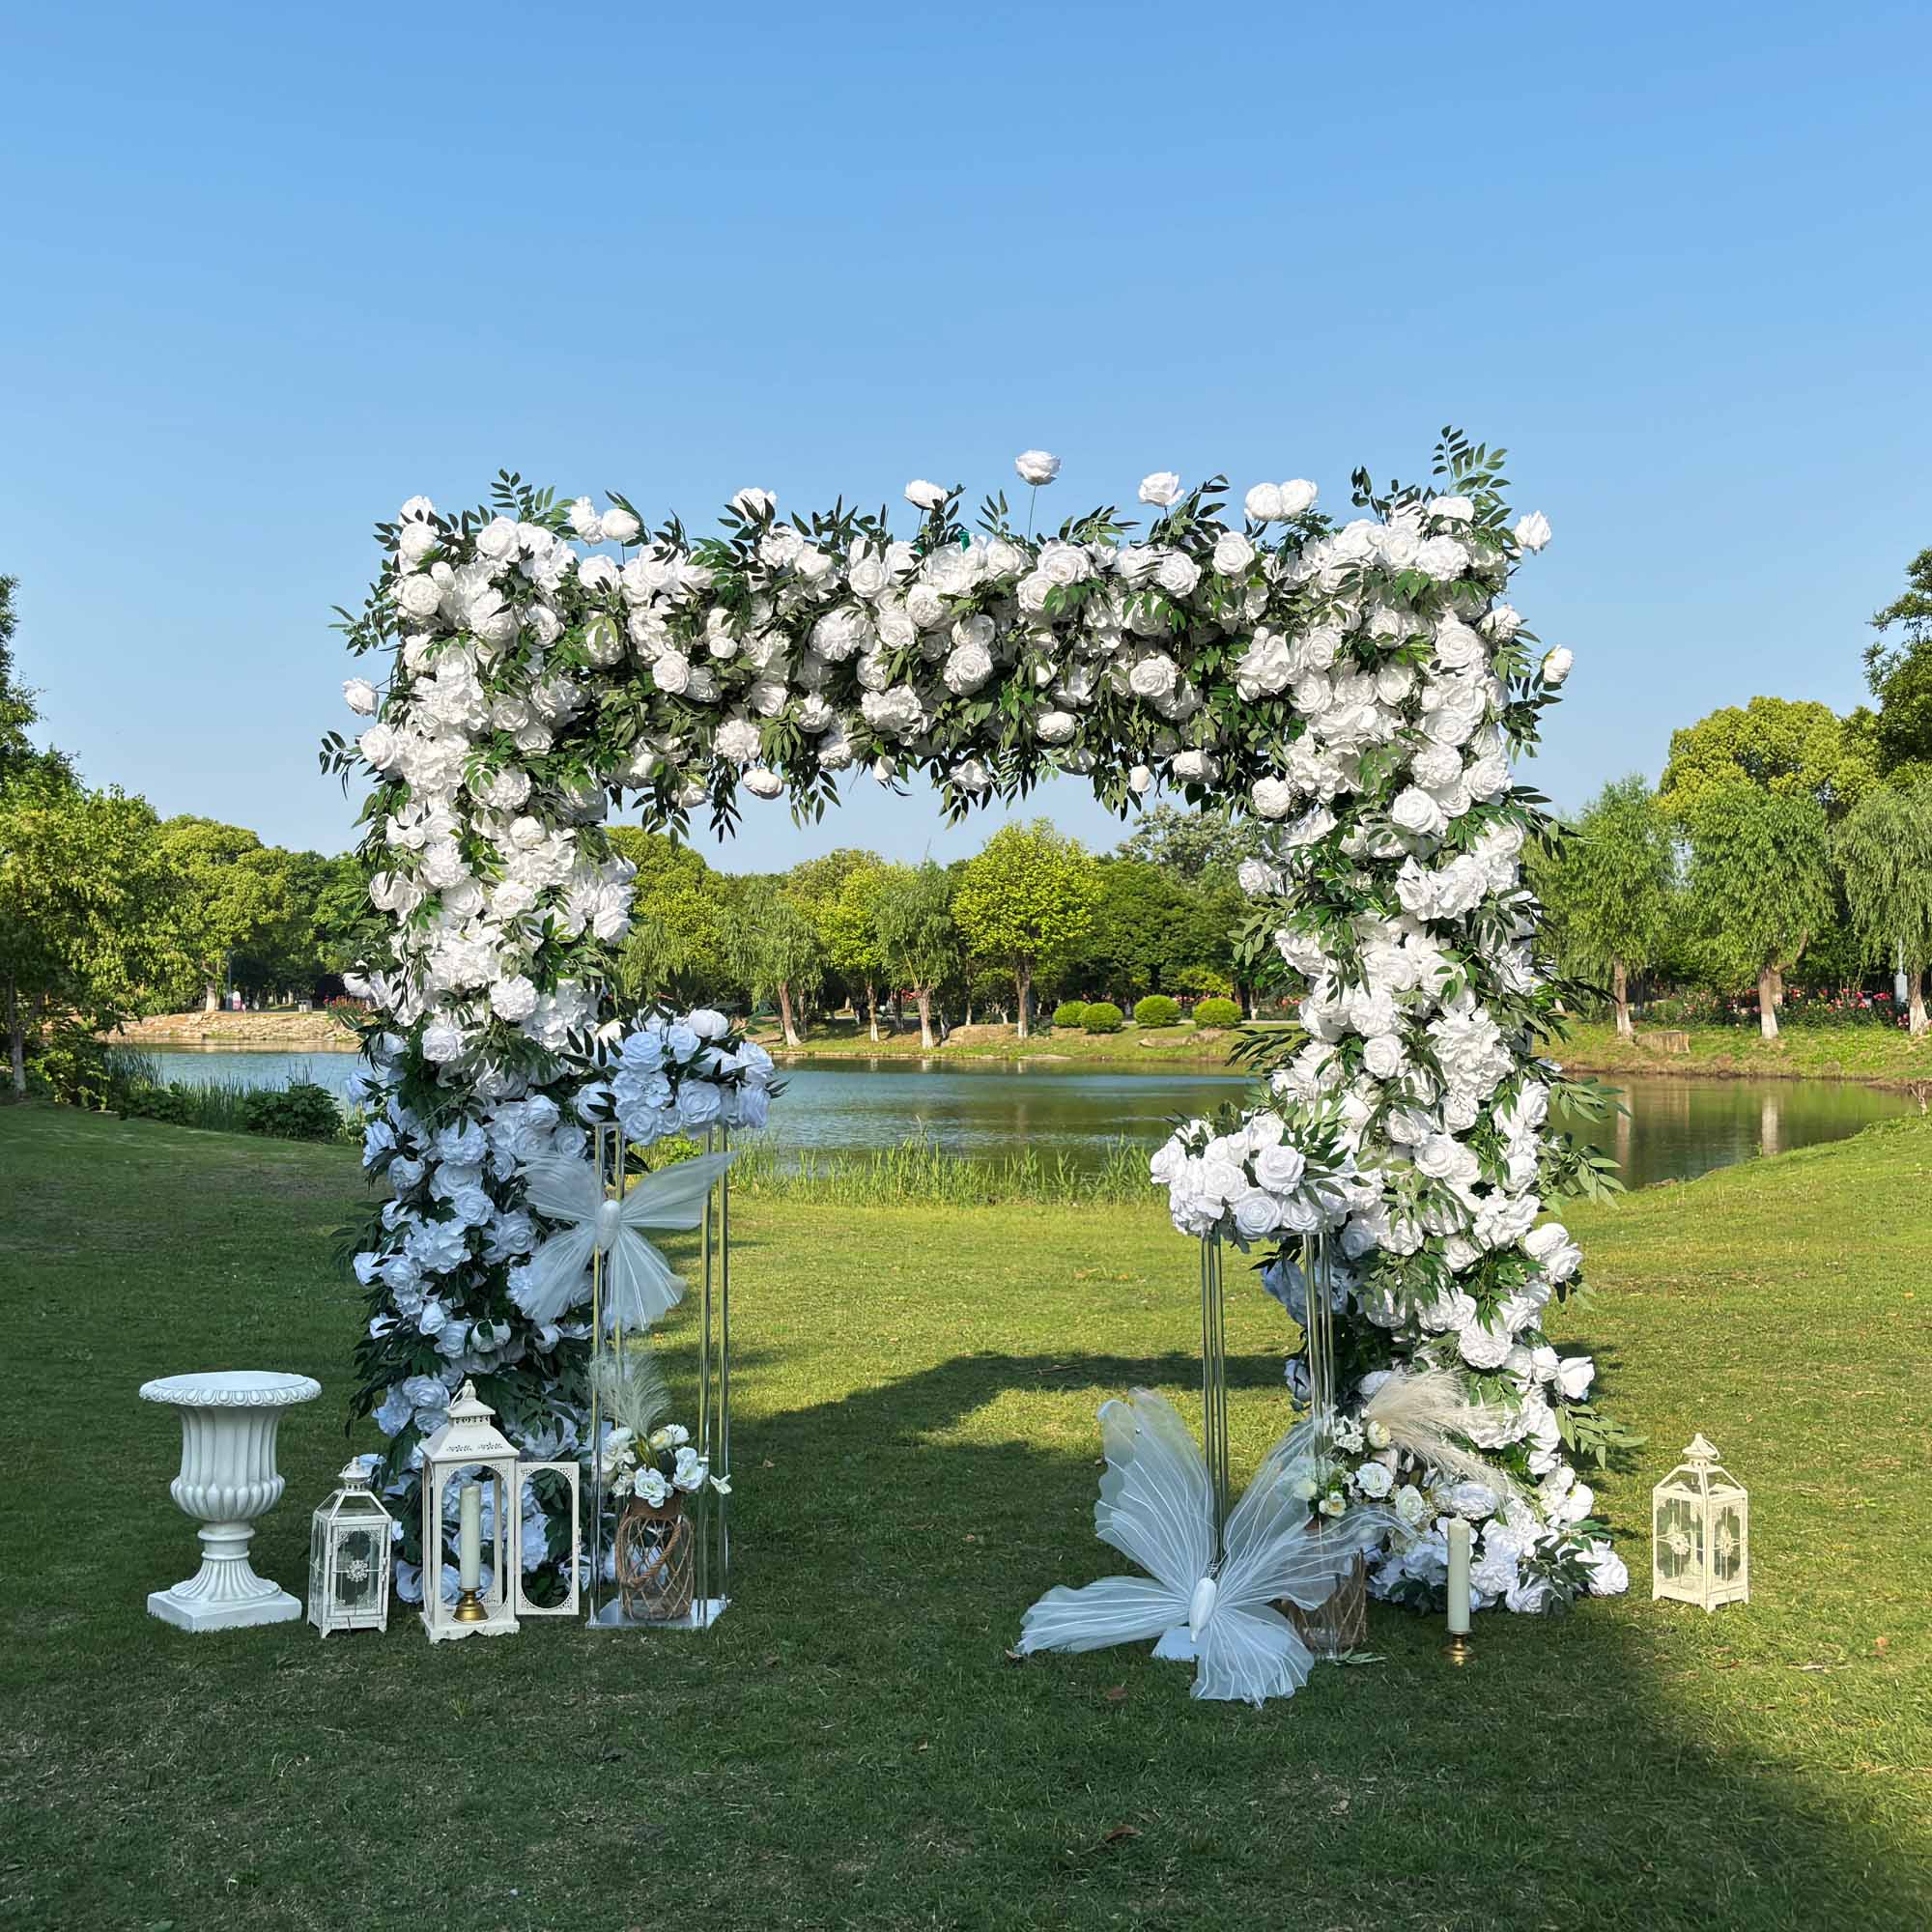 100% handmade, the 8x8ft white green roses flower arch provides a lifelike appearance and is easy to set up.